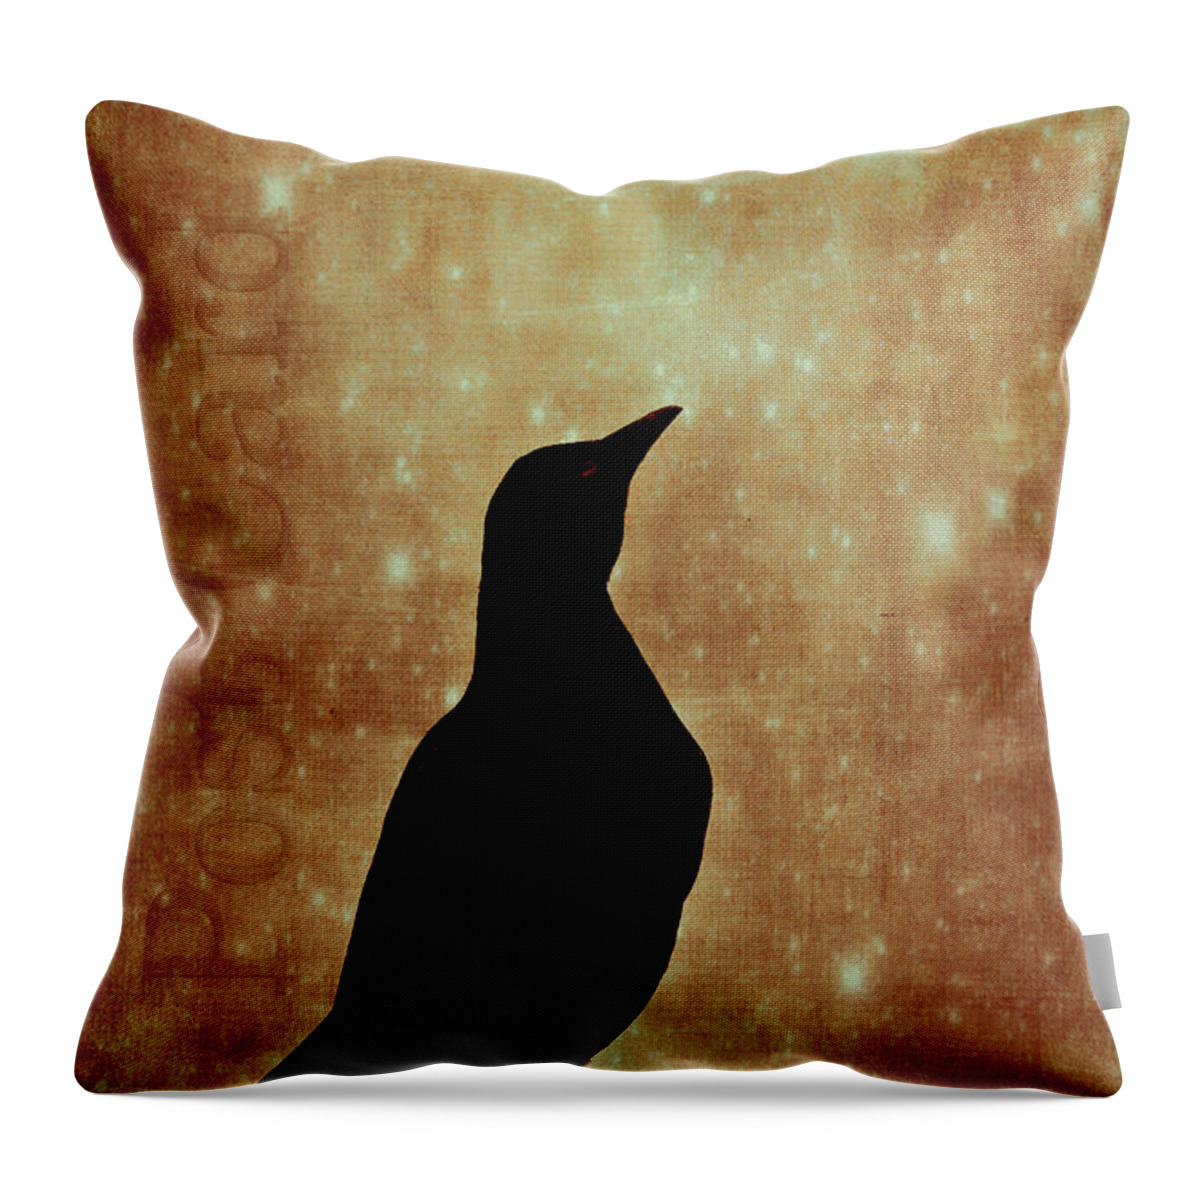 Wish You Were Here Throw Pillow featuring the photograph Wish You Were Here 2 by Carol Leigh